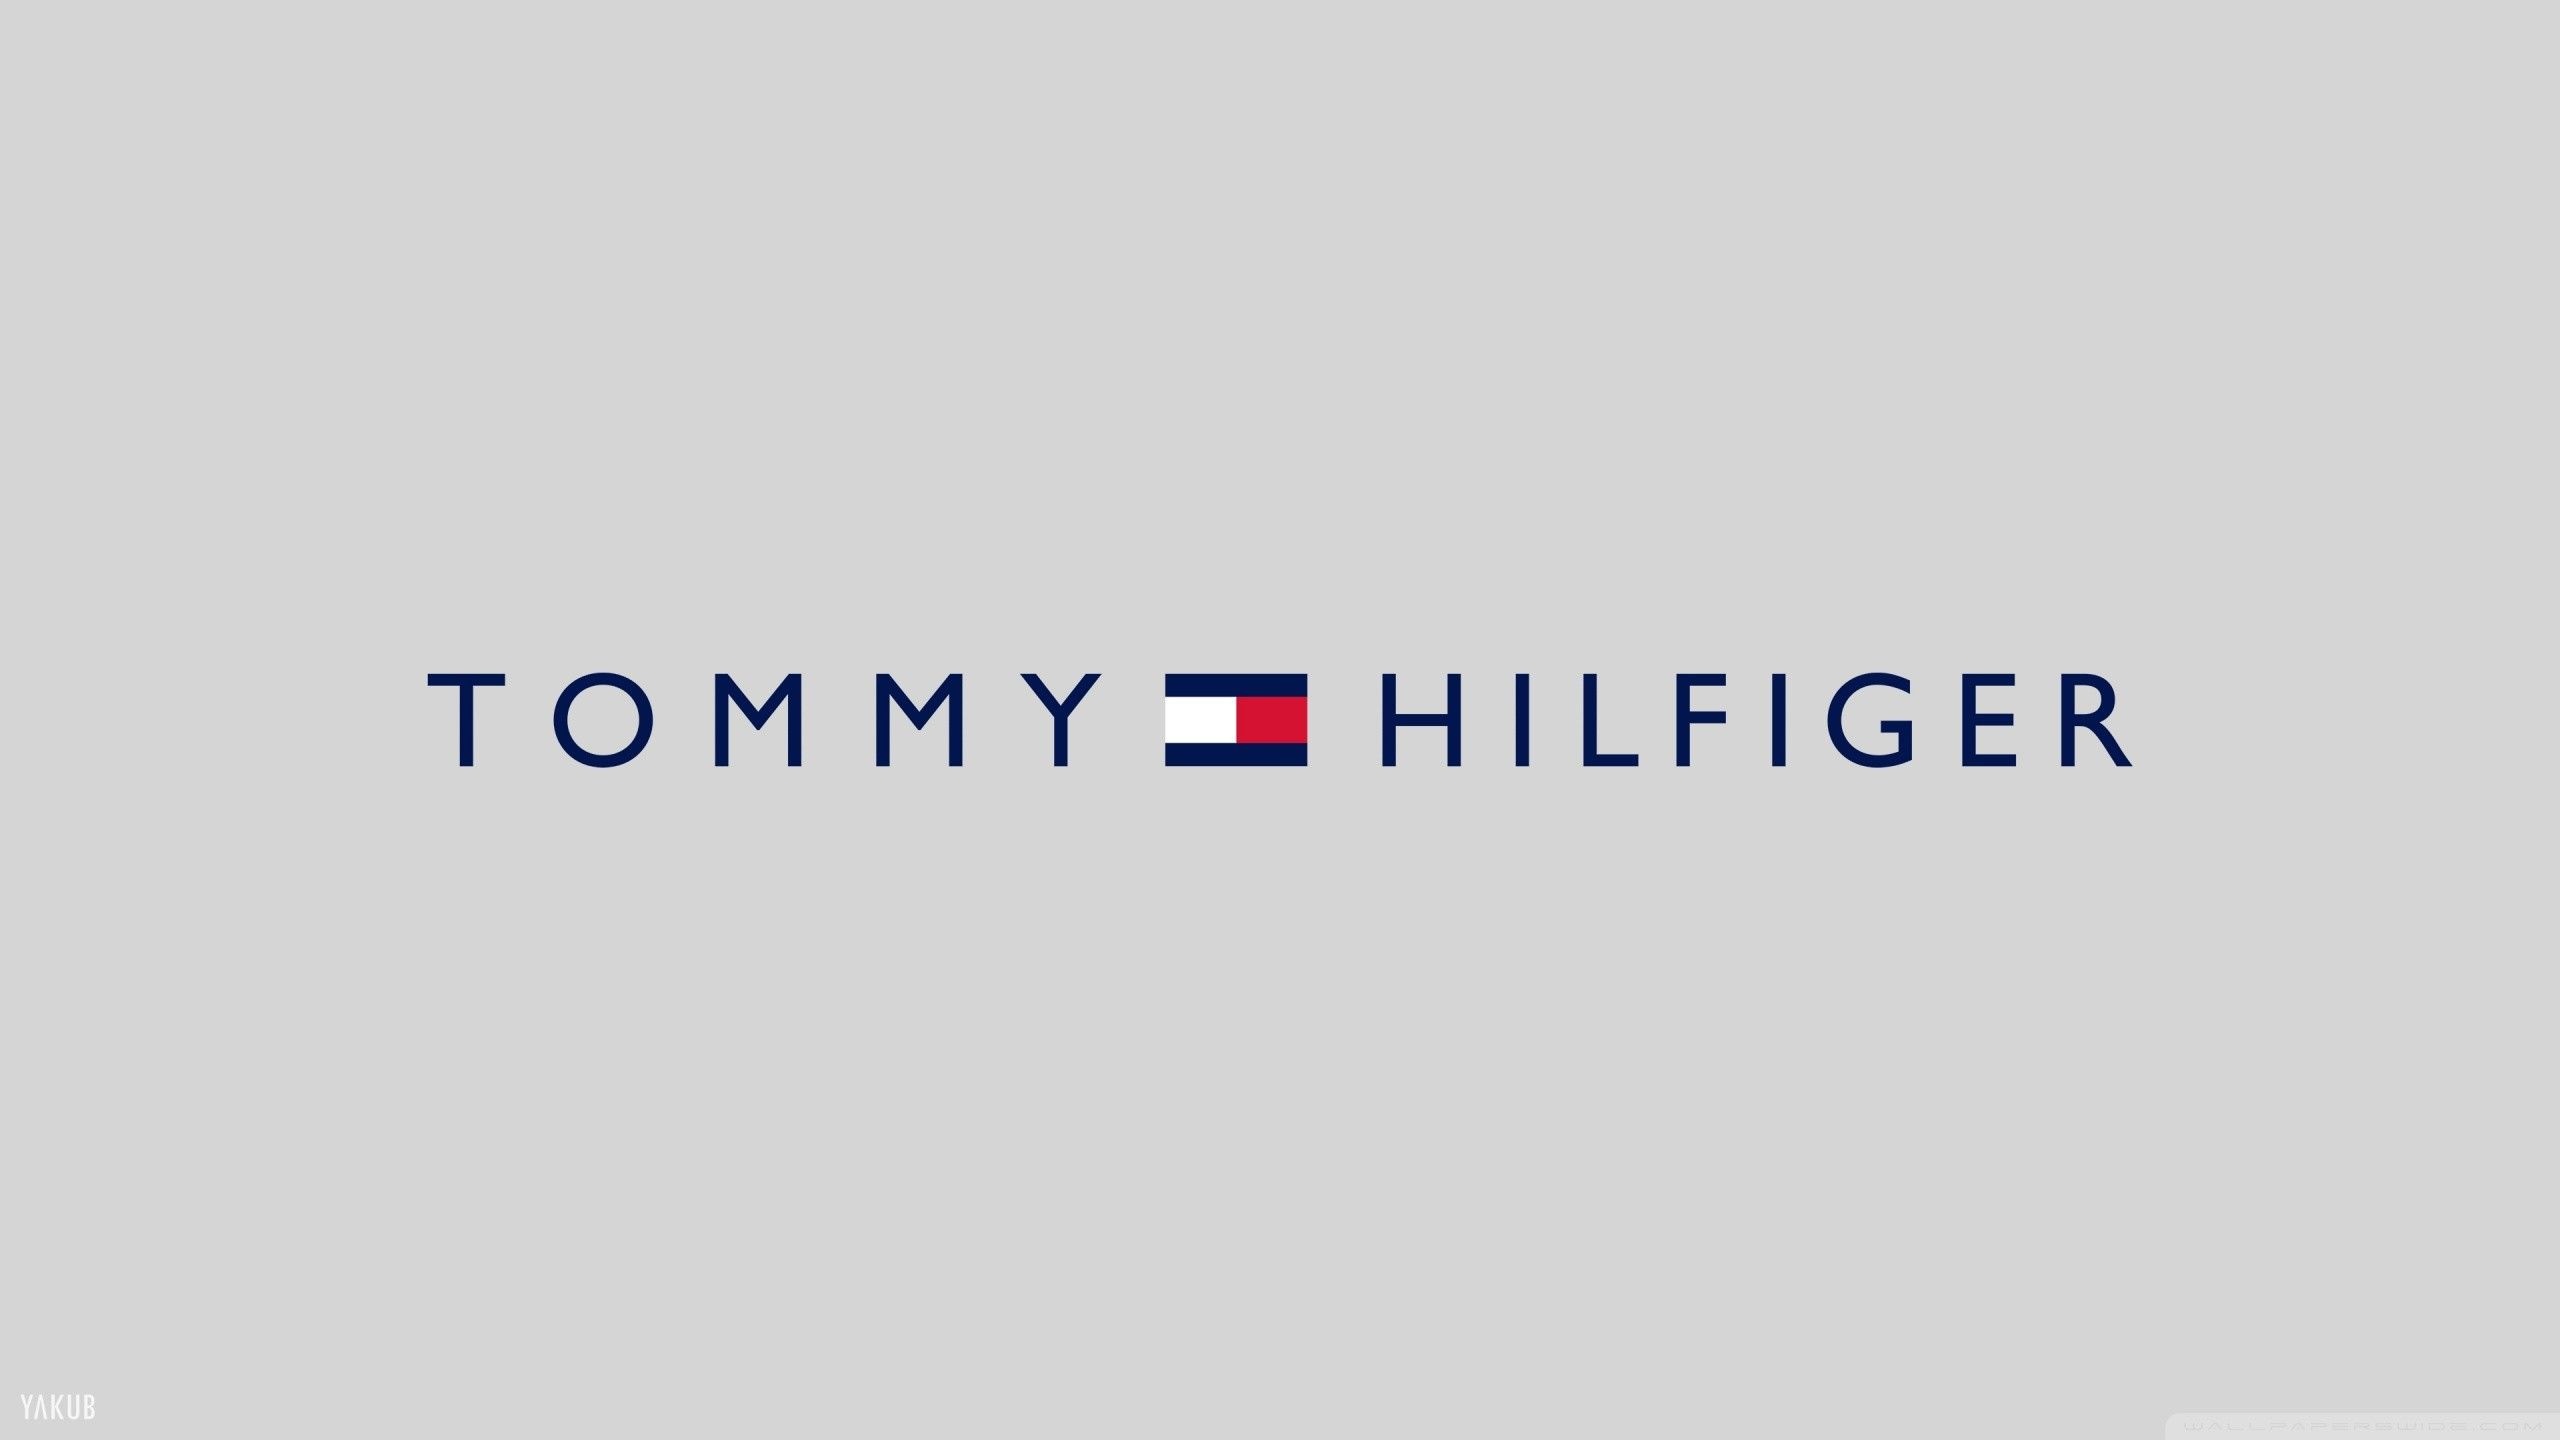 Tommy Hilfiger: The brand renowned for its preppy and classic American cool aesthetic, Logo. 2560x1440 HD Background.